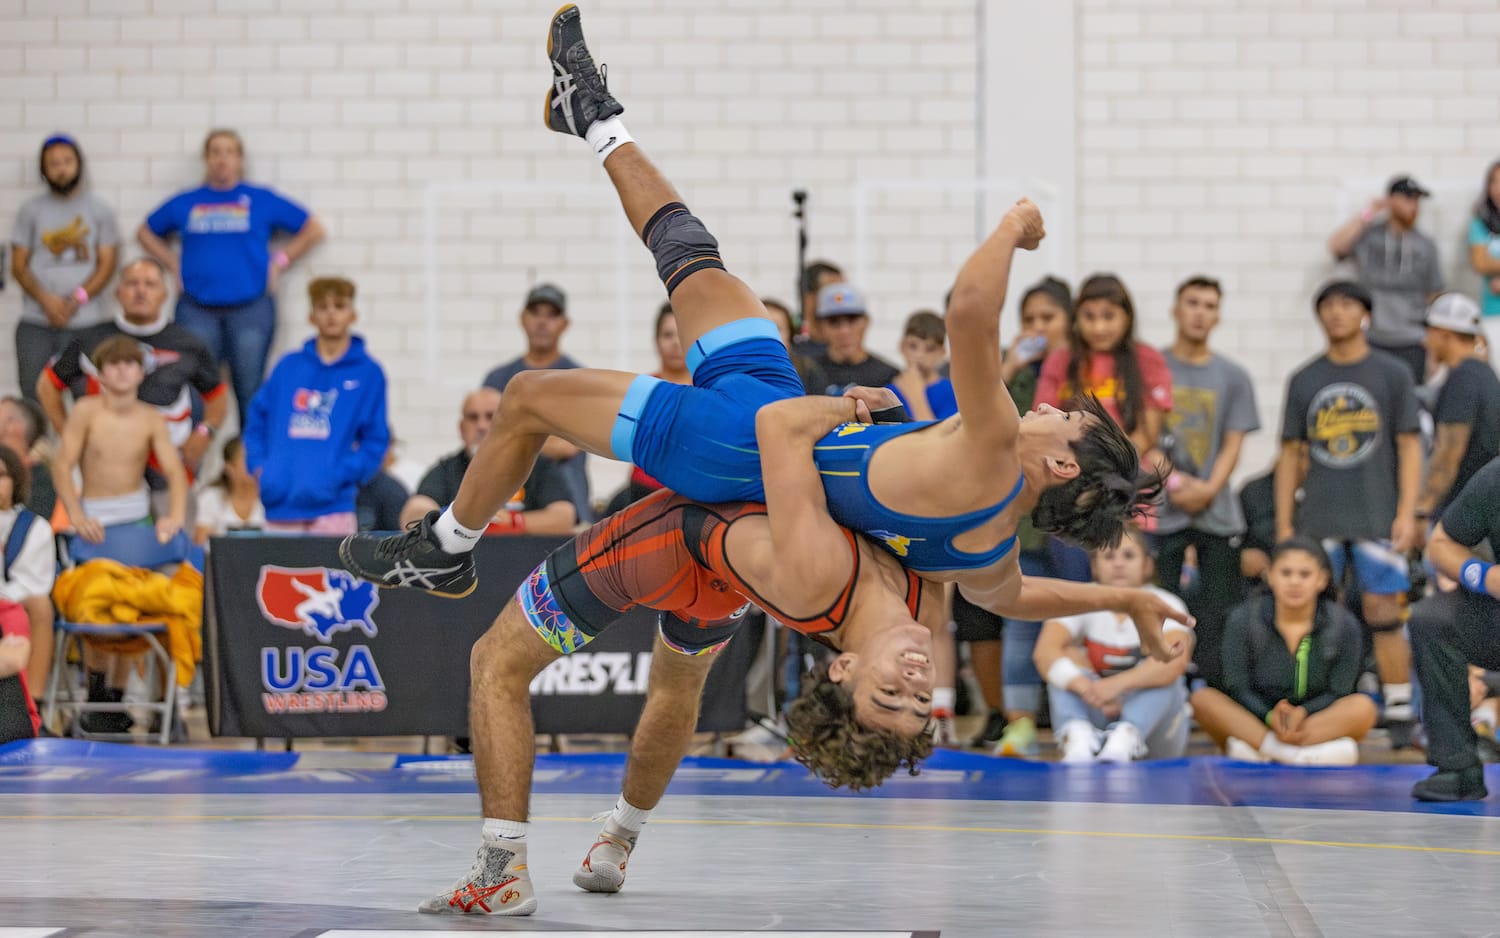 USA Wrestling Day one of U15 Pan American Team Trials concludes with